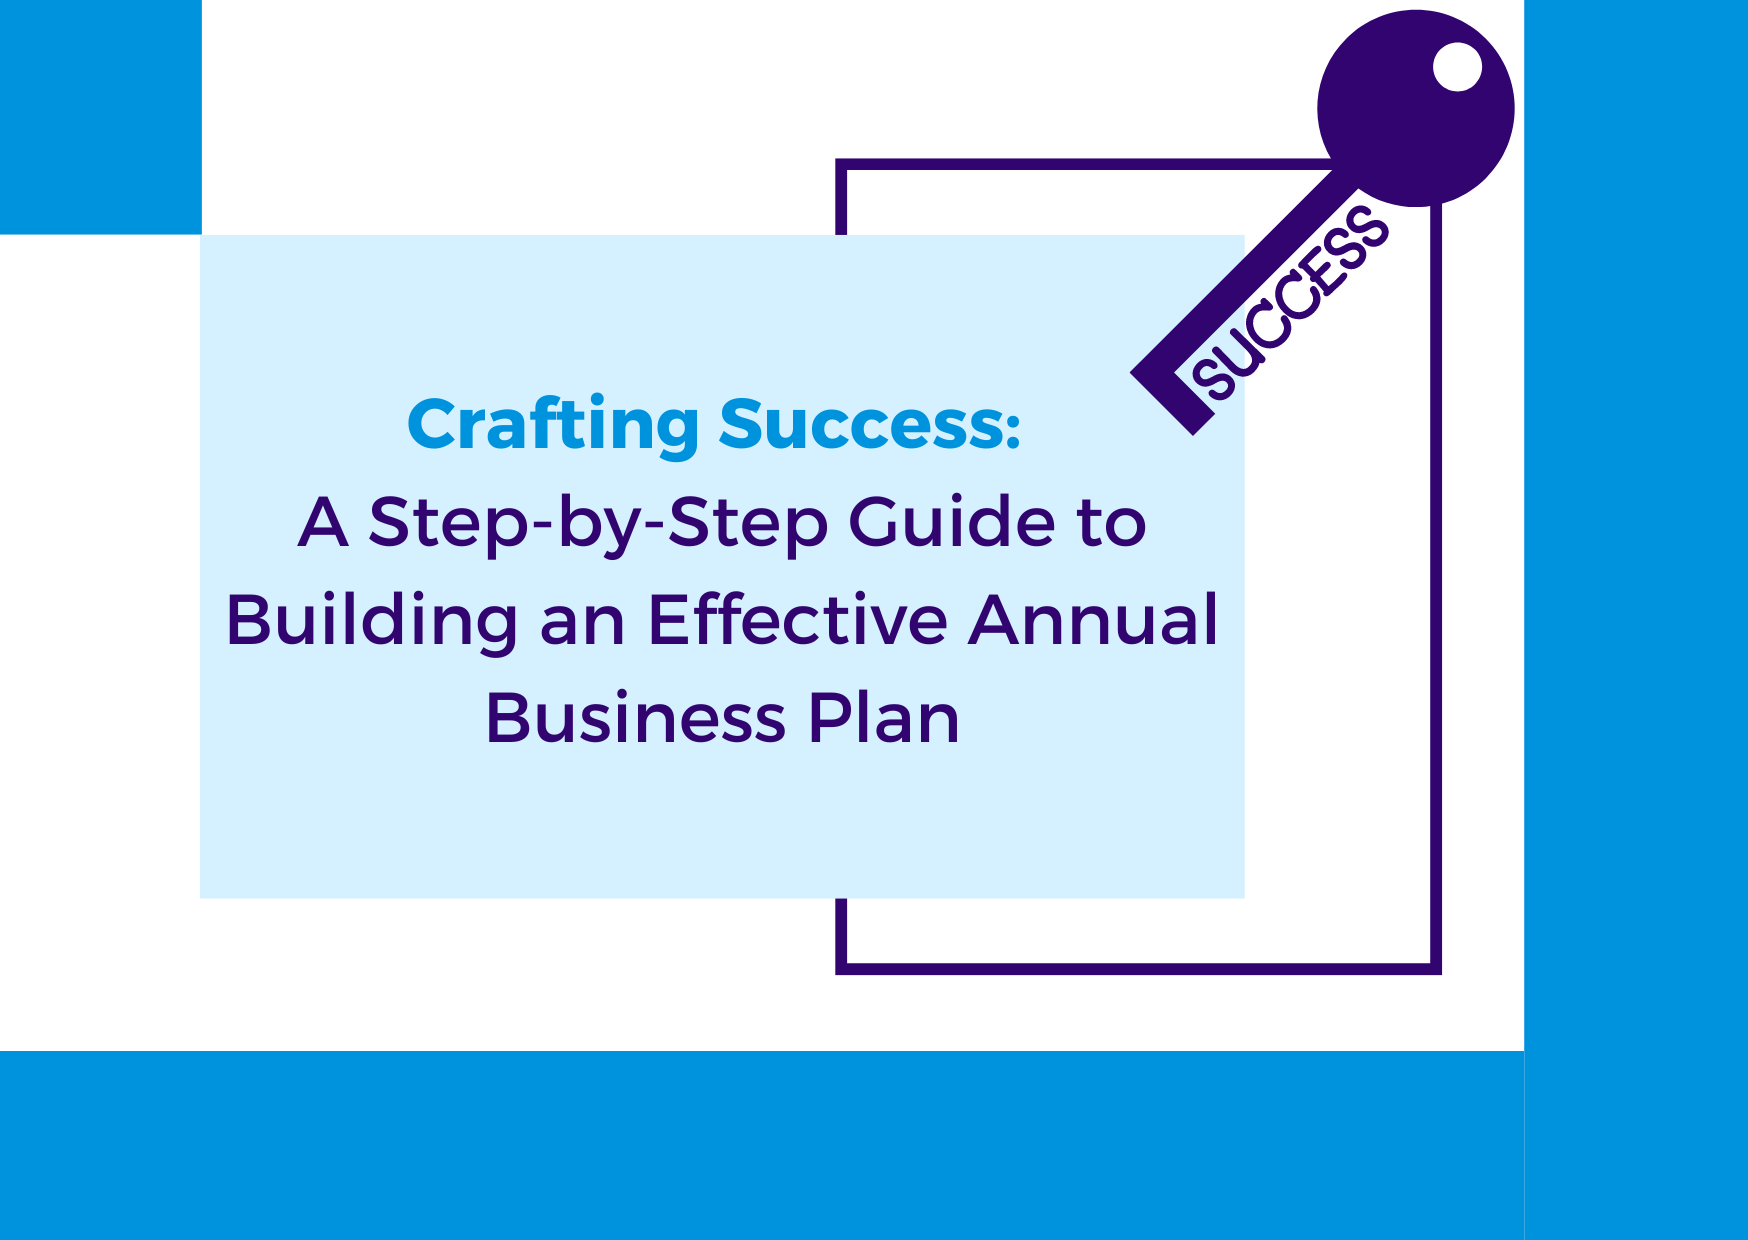 Step-by-Step Guide to Build an Effective Annual Business Plan